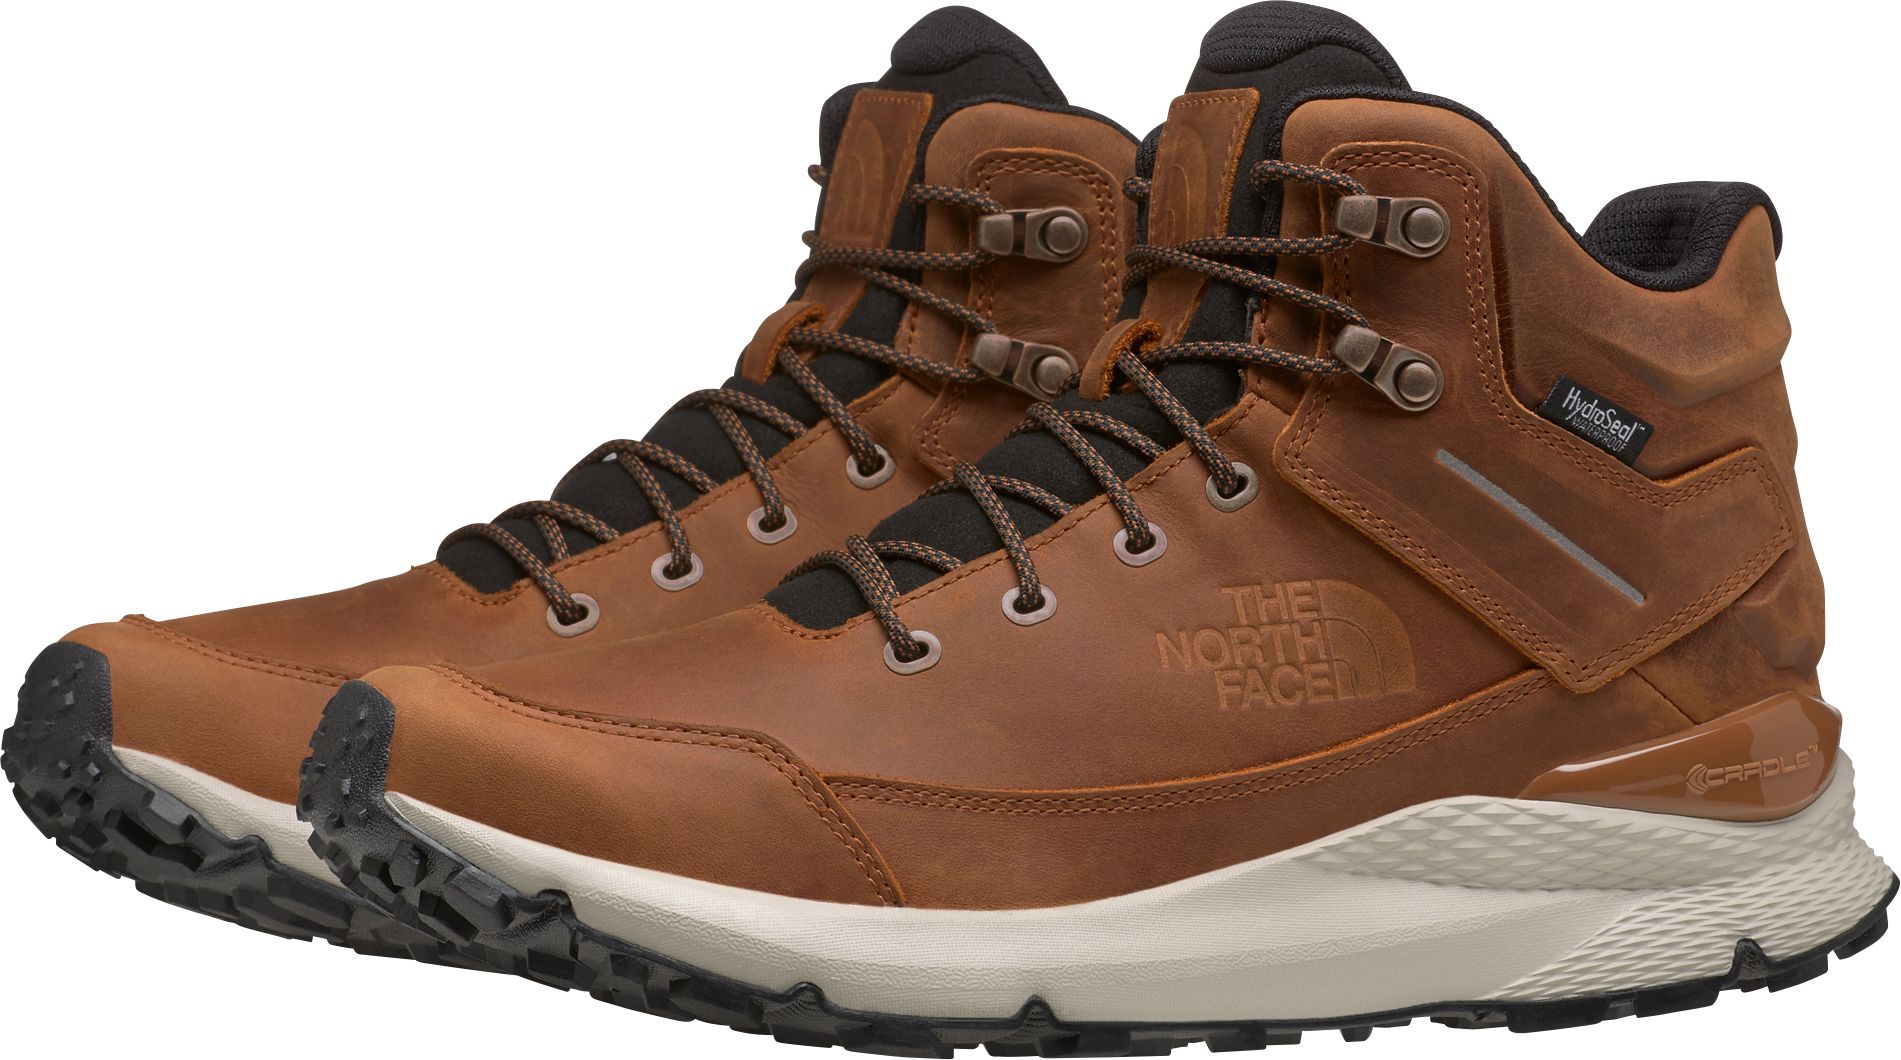 The North Face Mens Vals Mid Leather Waterproof Hiking Boots